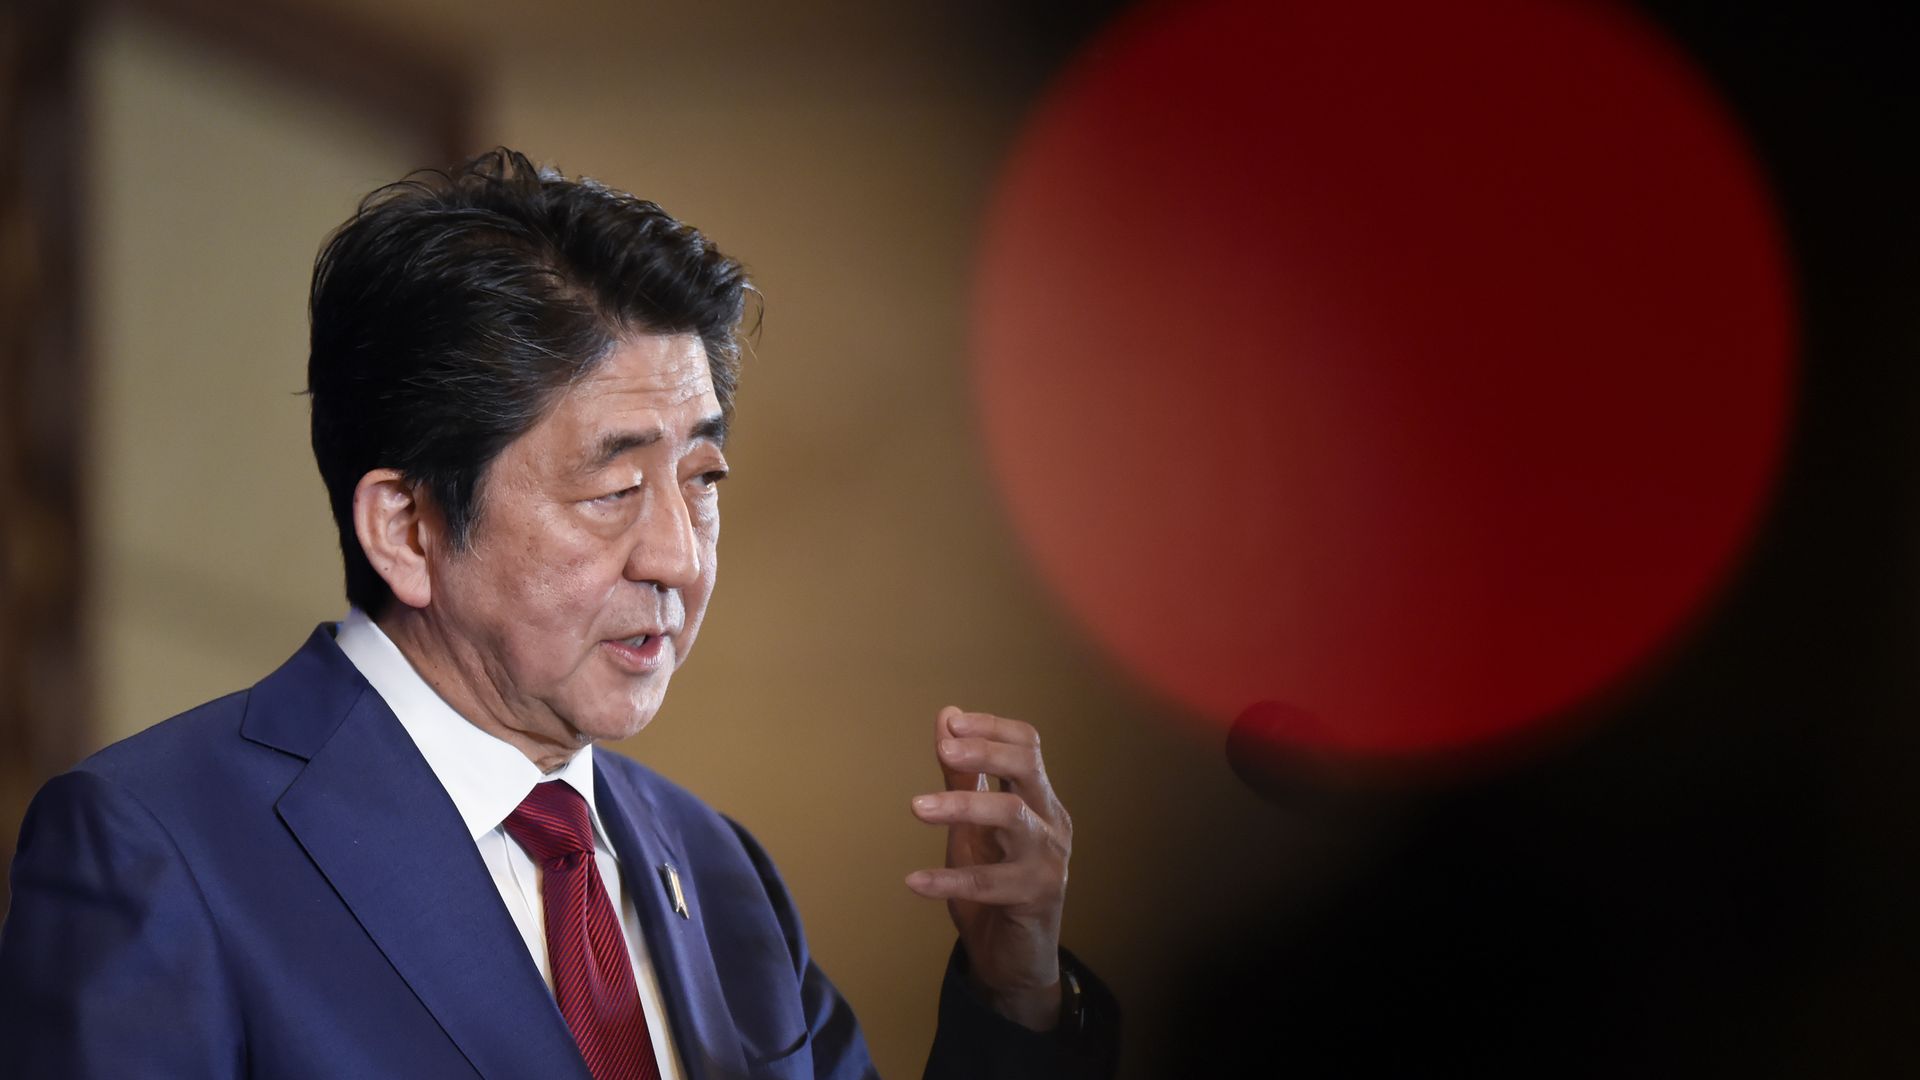 Former Japanese Prime Minister Shinzo Abe a question at a press conference after attending the 8th trilateral leaders' meeting between China, South Korea and Japan in Chengdu